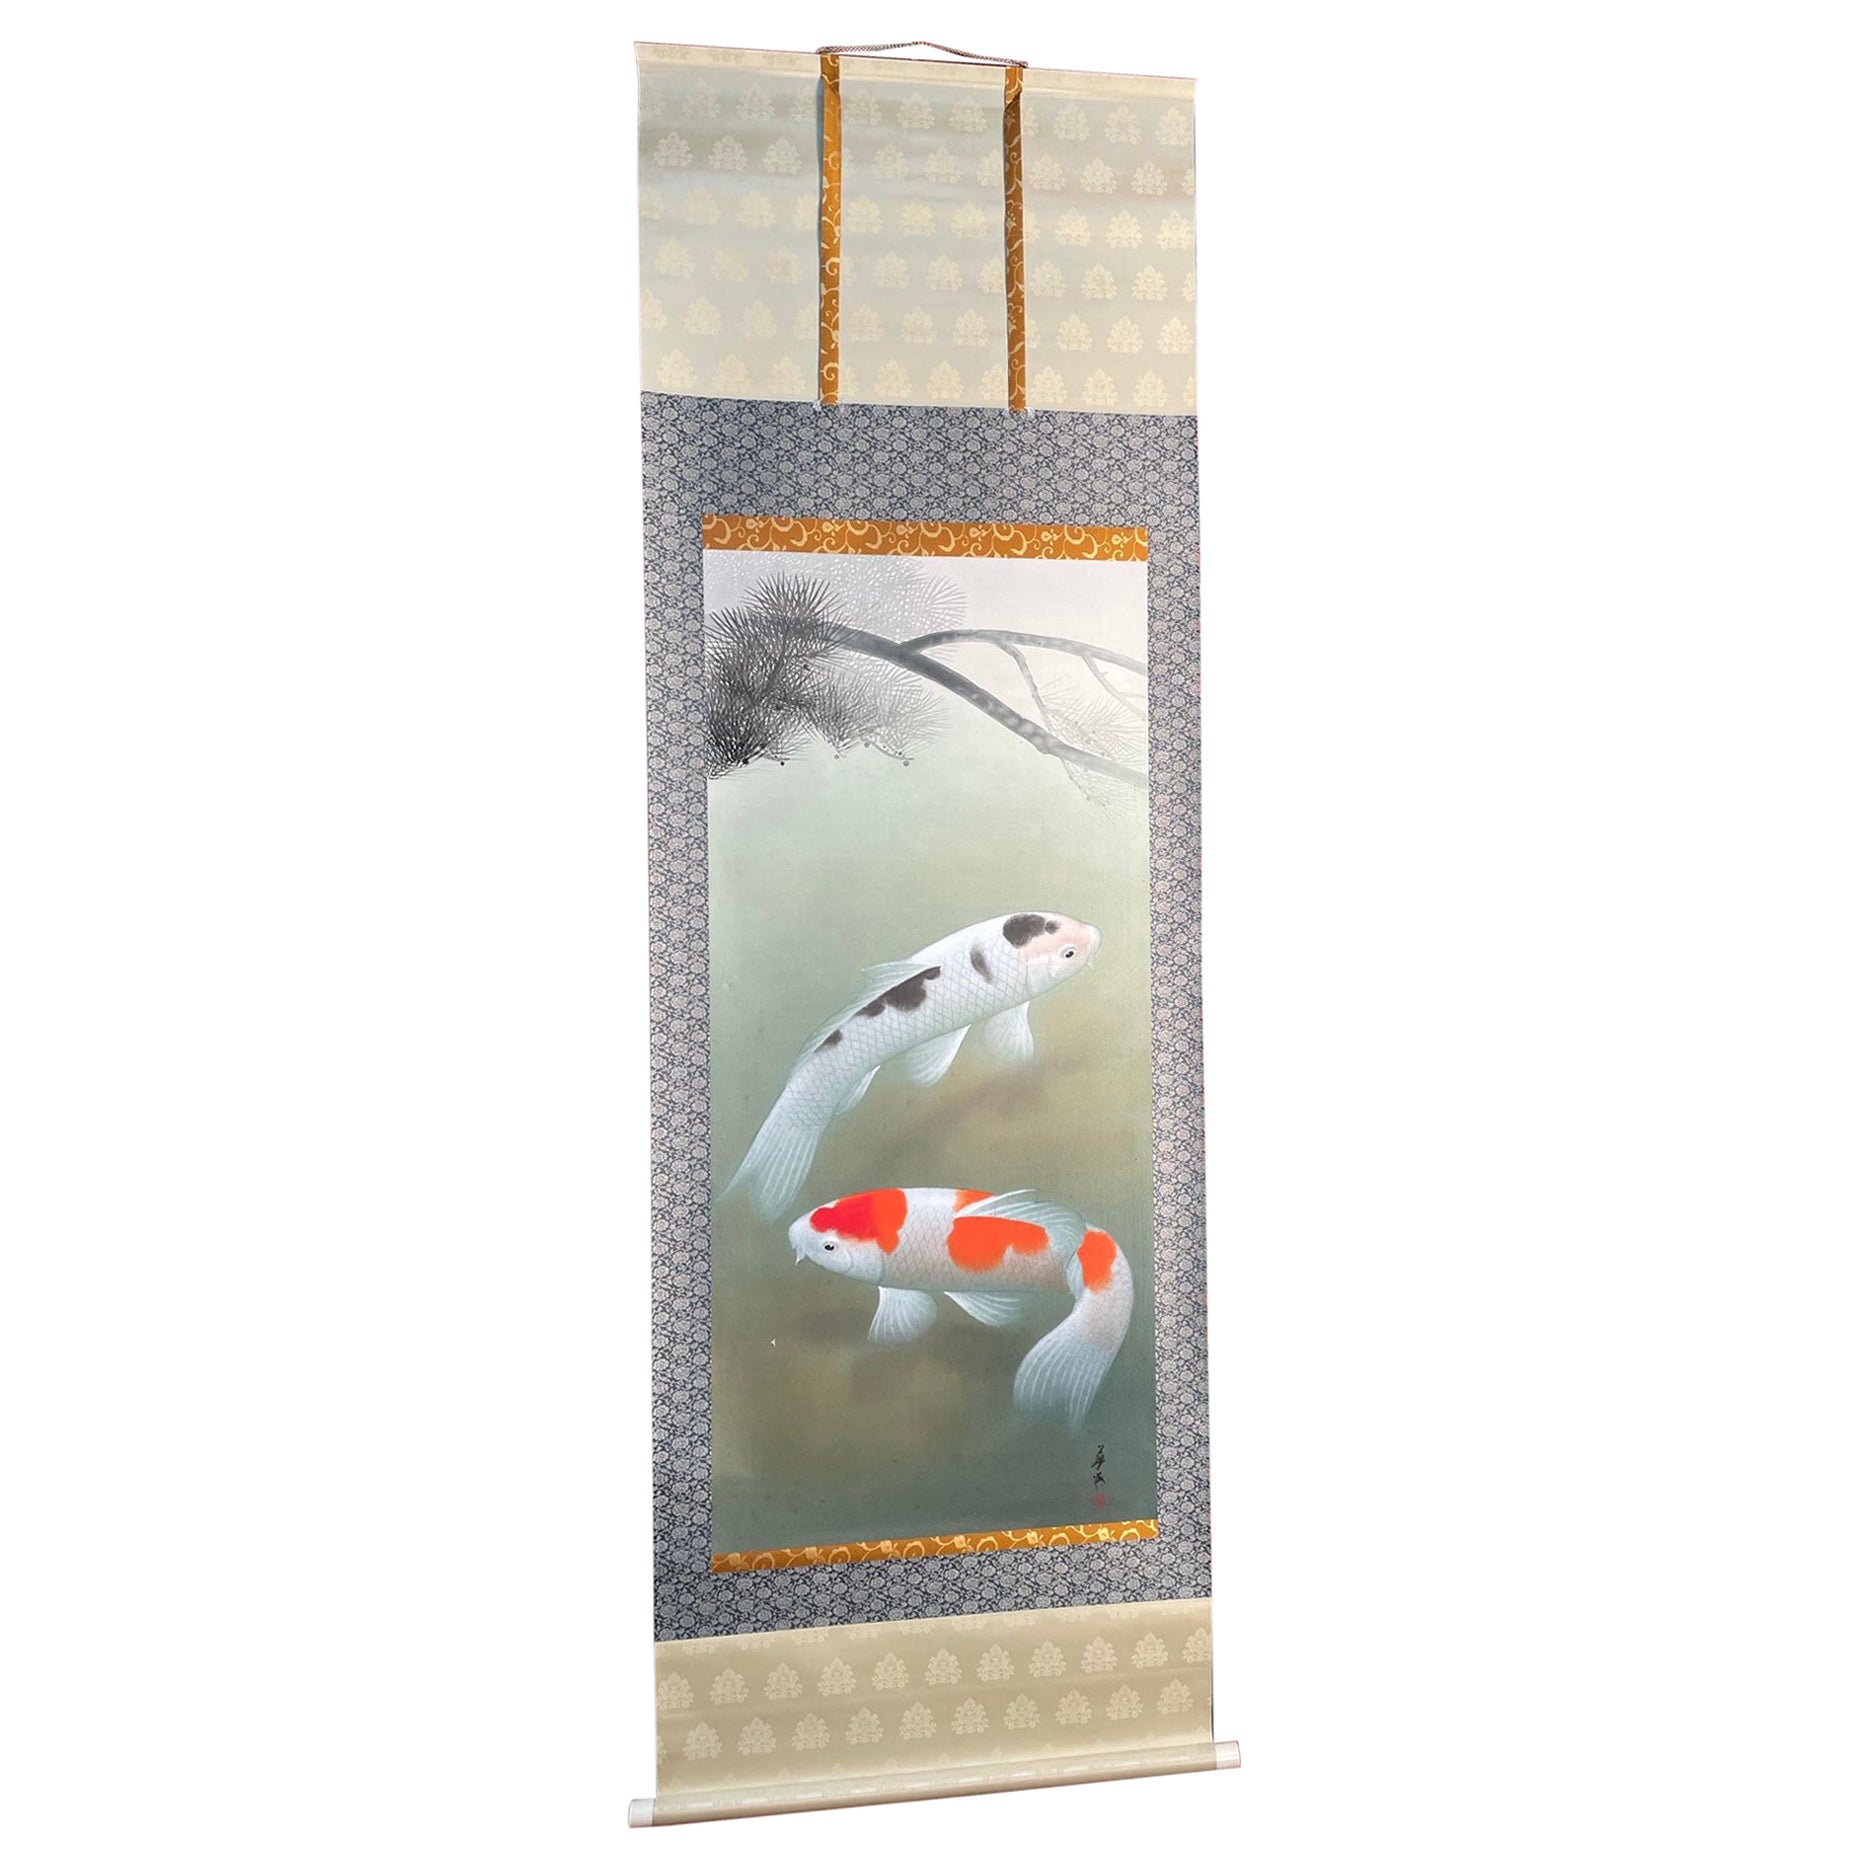 Japanese Magnificent Koi Fish Silk Scroll Hand Painting Signed & Boxed